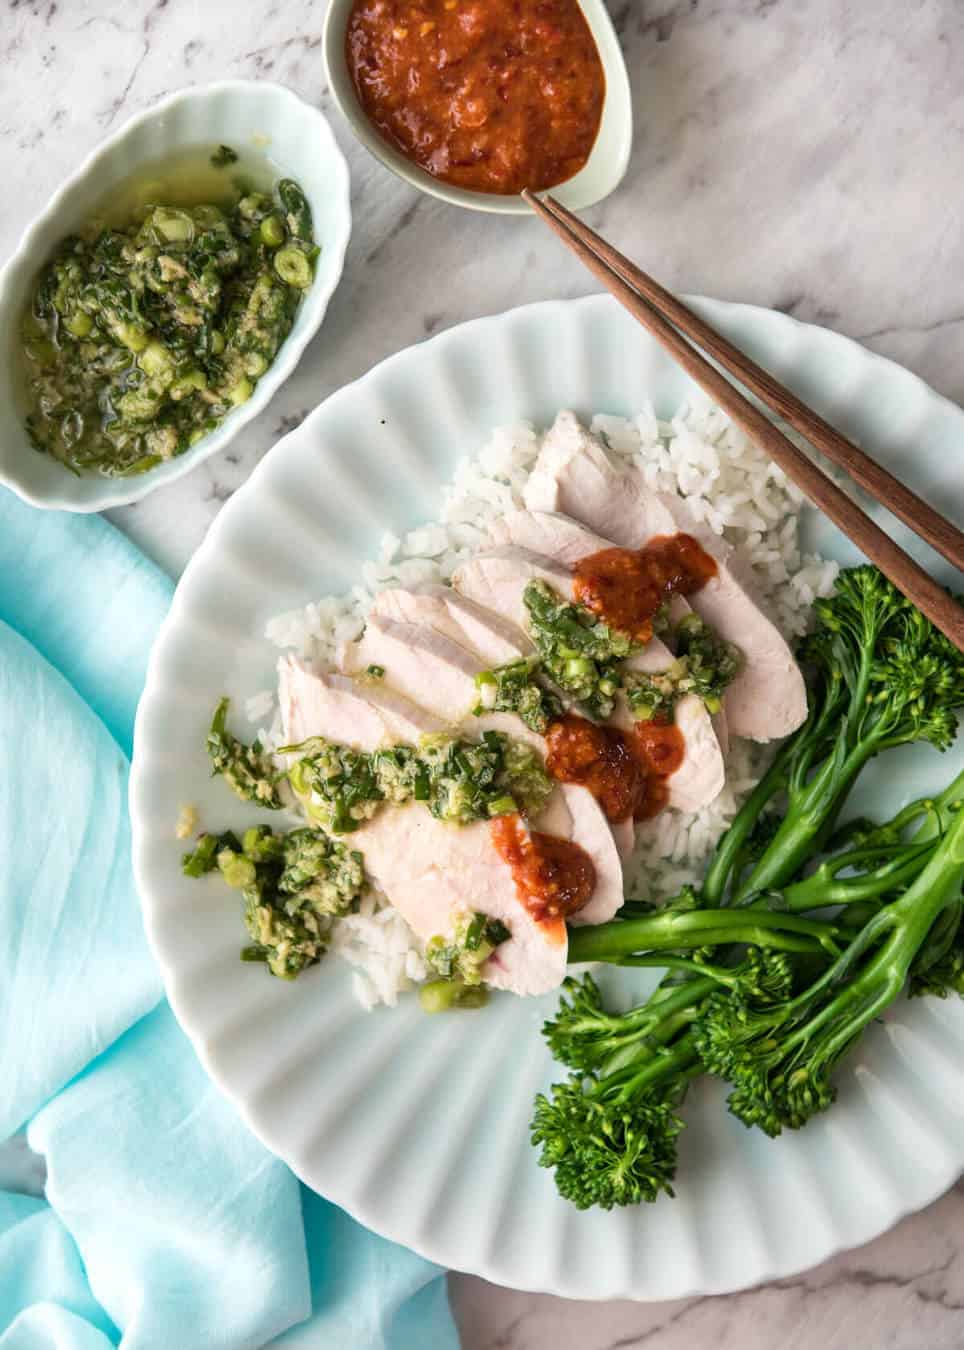 Foolproof Poached Chicken Breast With Ginger Shallot Sauce Recipetin Eats,Stair Carpet Protector